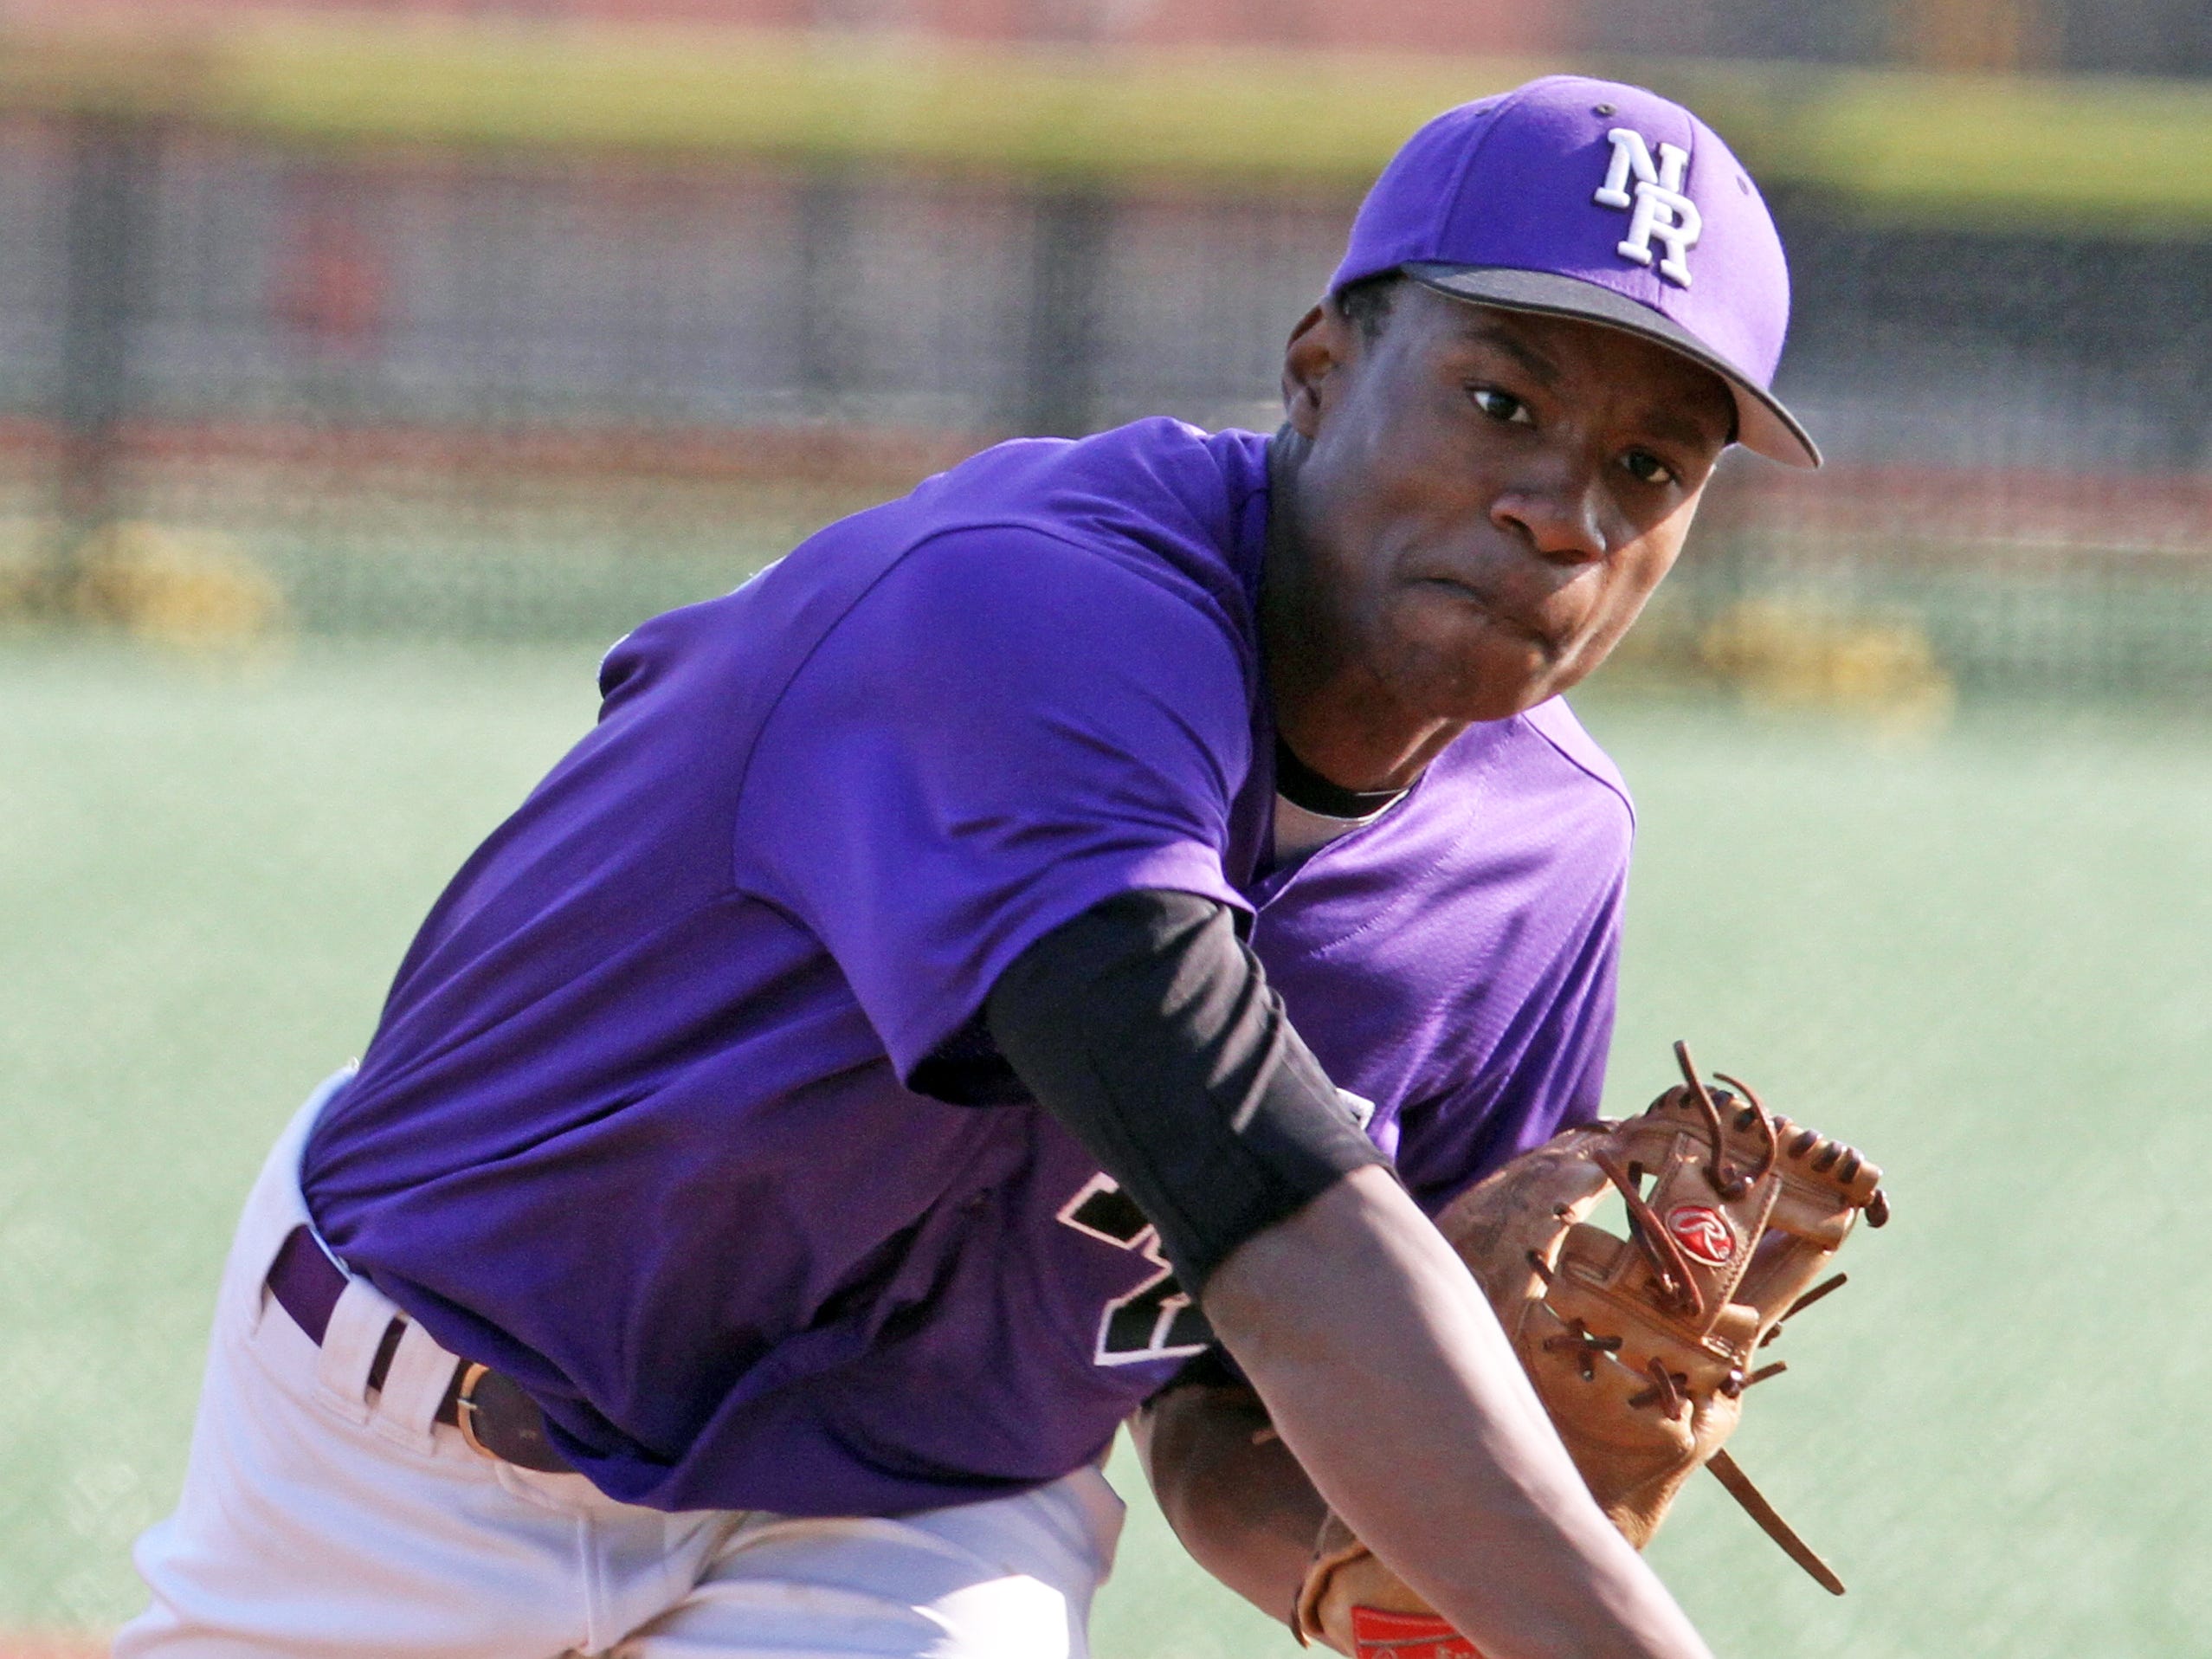 New Rochelle's JoJo Gray struck out ten batters over 8 1/3 innings as Mamaroneck defeated New Rochelle 2-1 in nine innings in a varsity baseball game at City Park in New Rochelle April 21, 2015. Gray held Mamaroneck scoreless for eight innings, but gave up two runs in the ninth to take the loss.